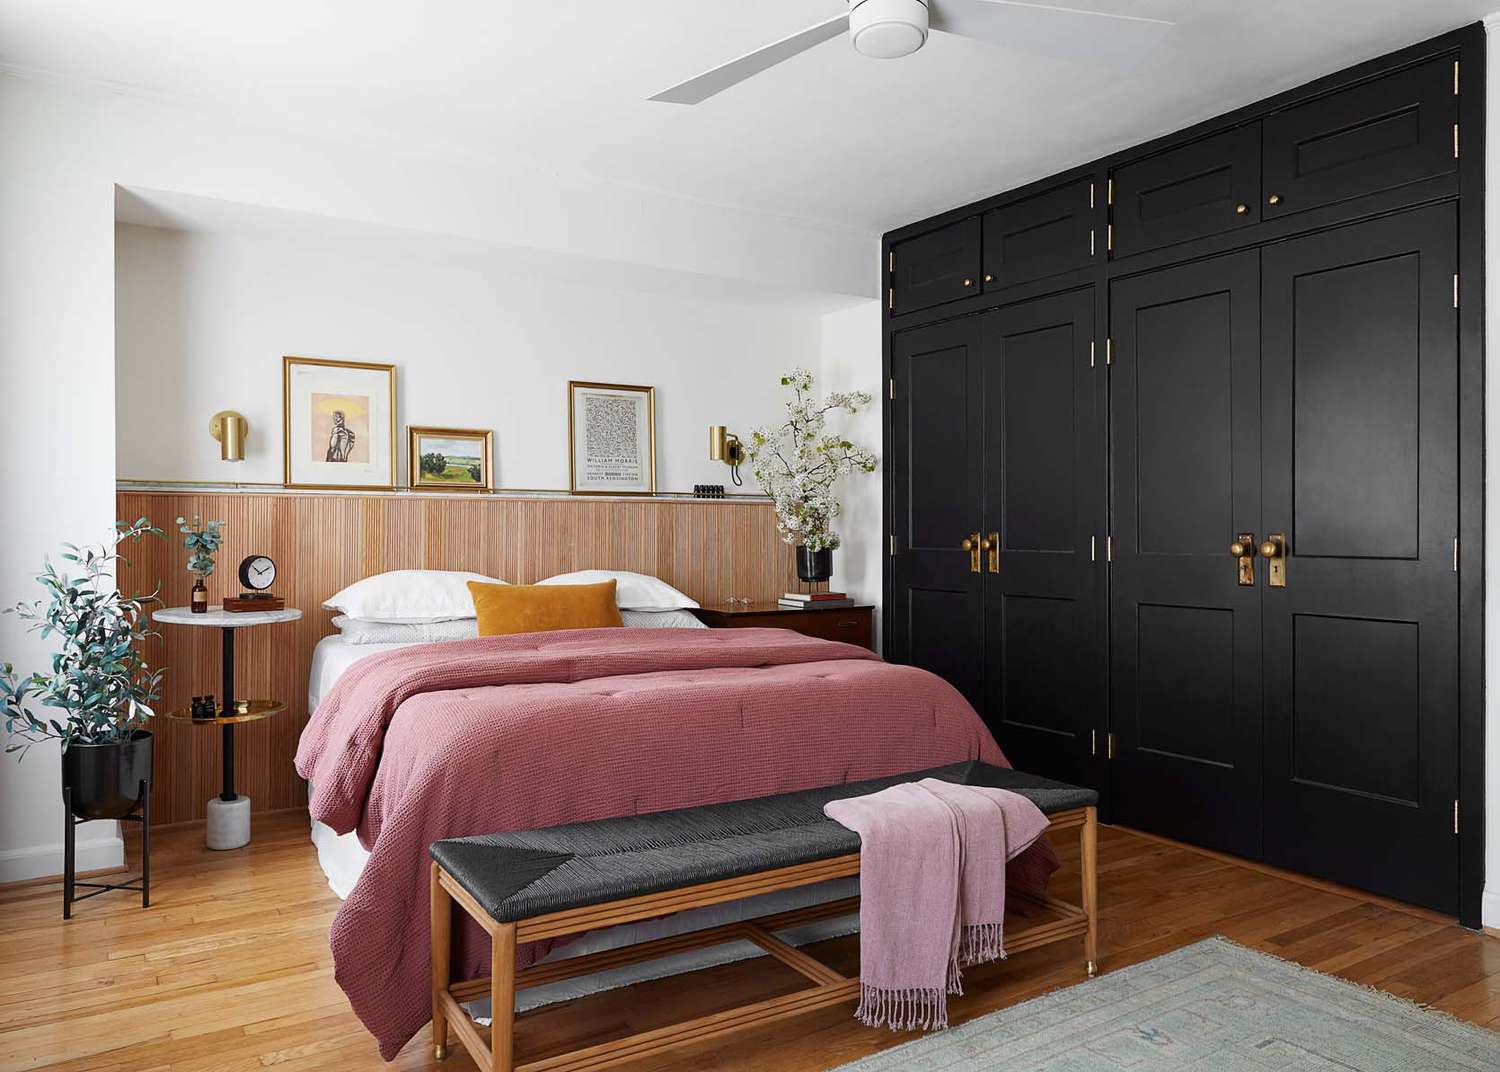 A peach colored bed sits next to a black accent wall